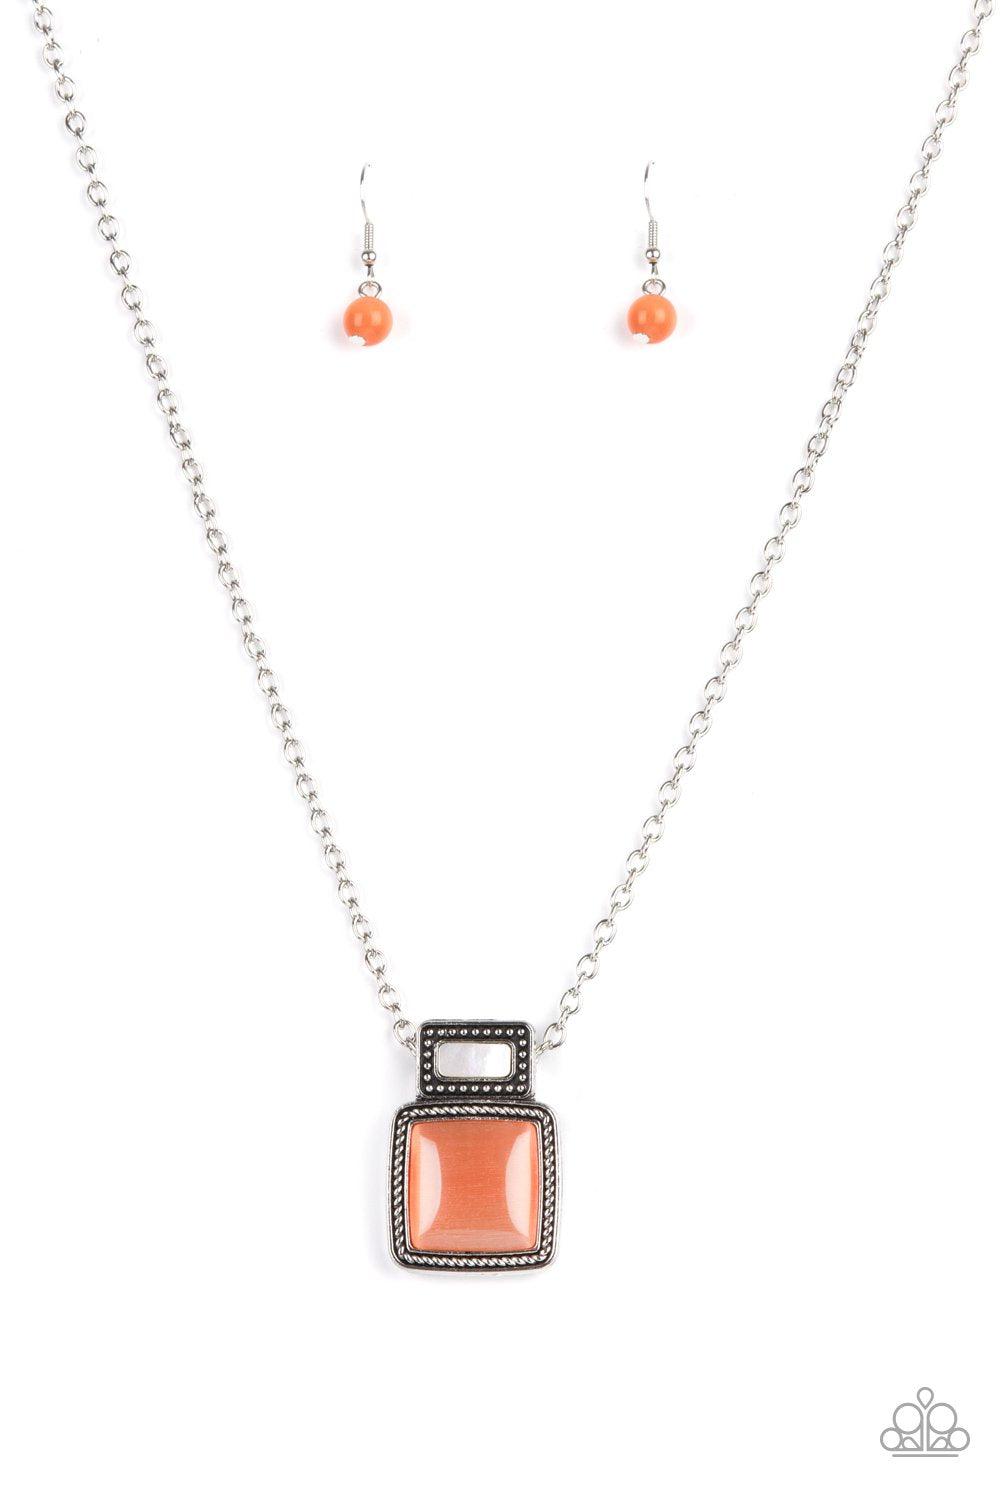 Ethereally Elemental Orange Cat's Eye Necklace - Paparazzi Accessories- lightbox - CarasShop.com - $5 Jewelry by Cara Jewels